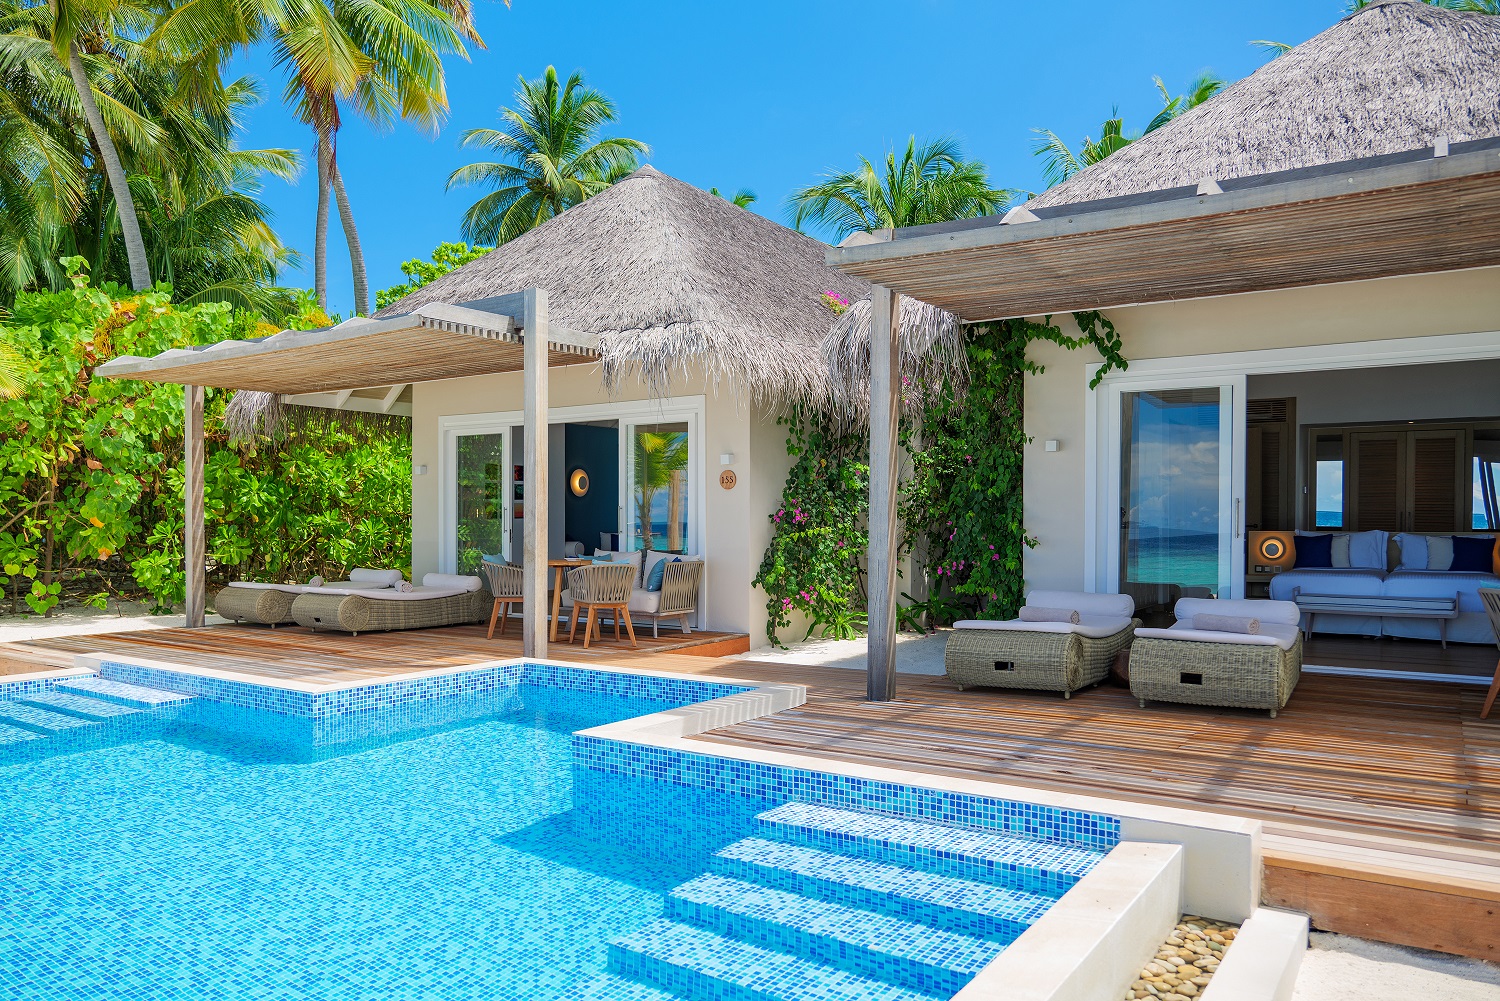 Save 35% on this luxurious 2 bedroom family beach villa with pool in the Maldives!